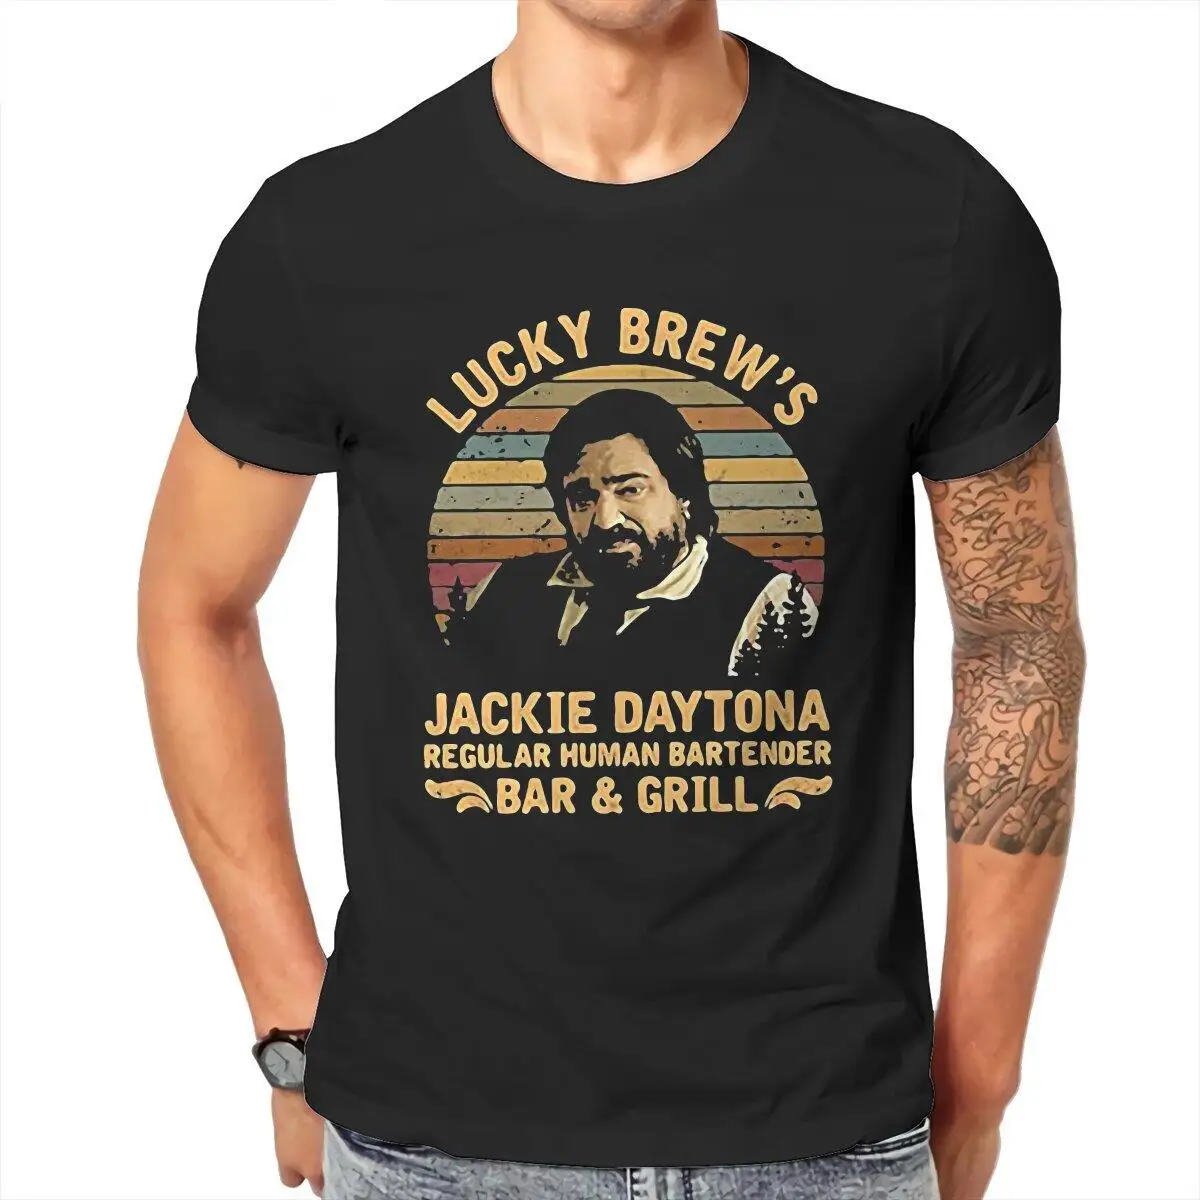 

Lucky Brew's Jackie Daytona Matt Berry T Shirt Men Cotton Humor T-Shirt What We Do in the Shadows Tees Graphic Printed Clothing